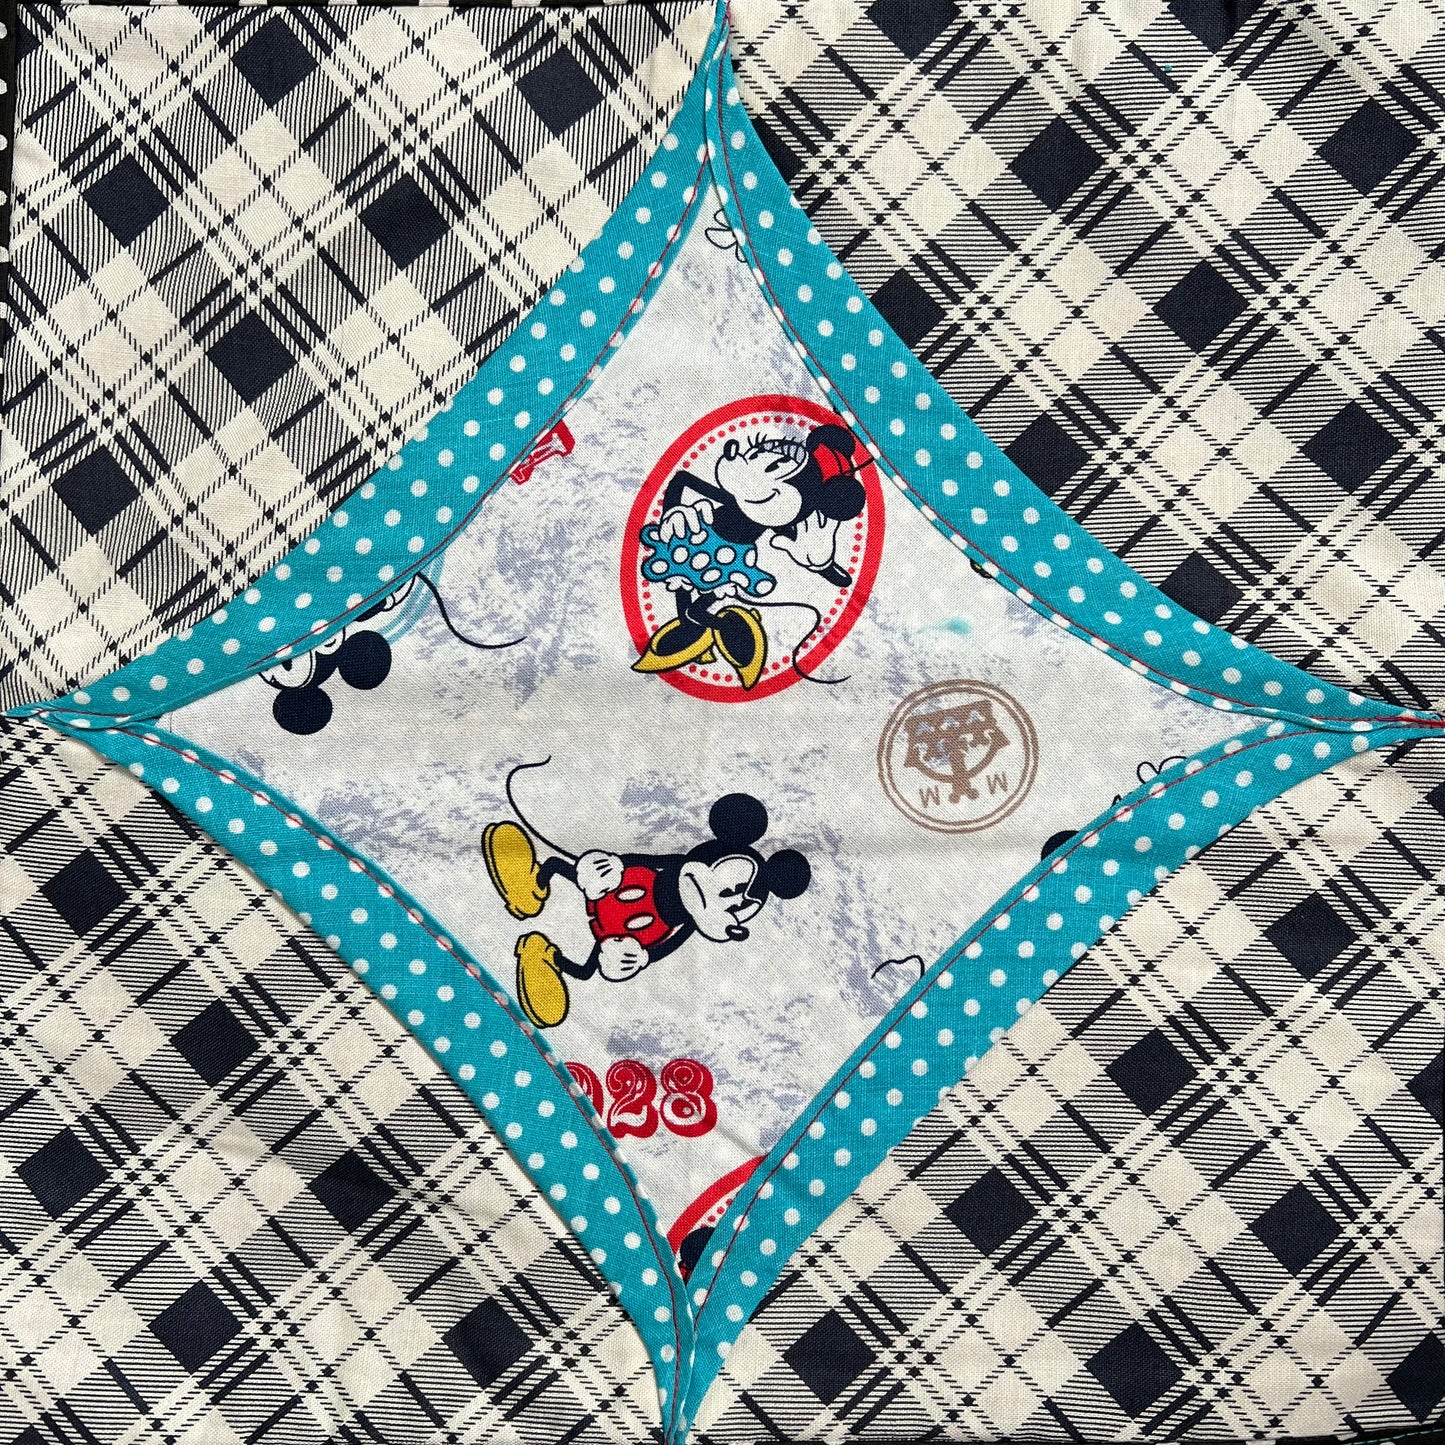 Minnie and Mickey Mouse fabric square, surrounded by blue polkadots, then black and white plaid fabrics